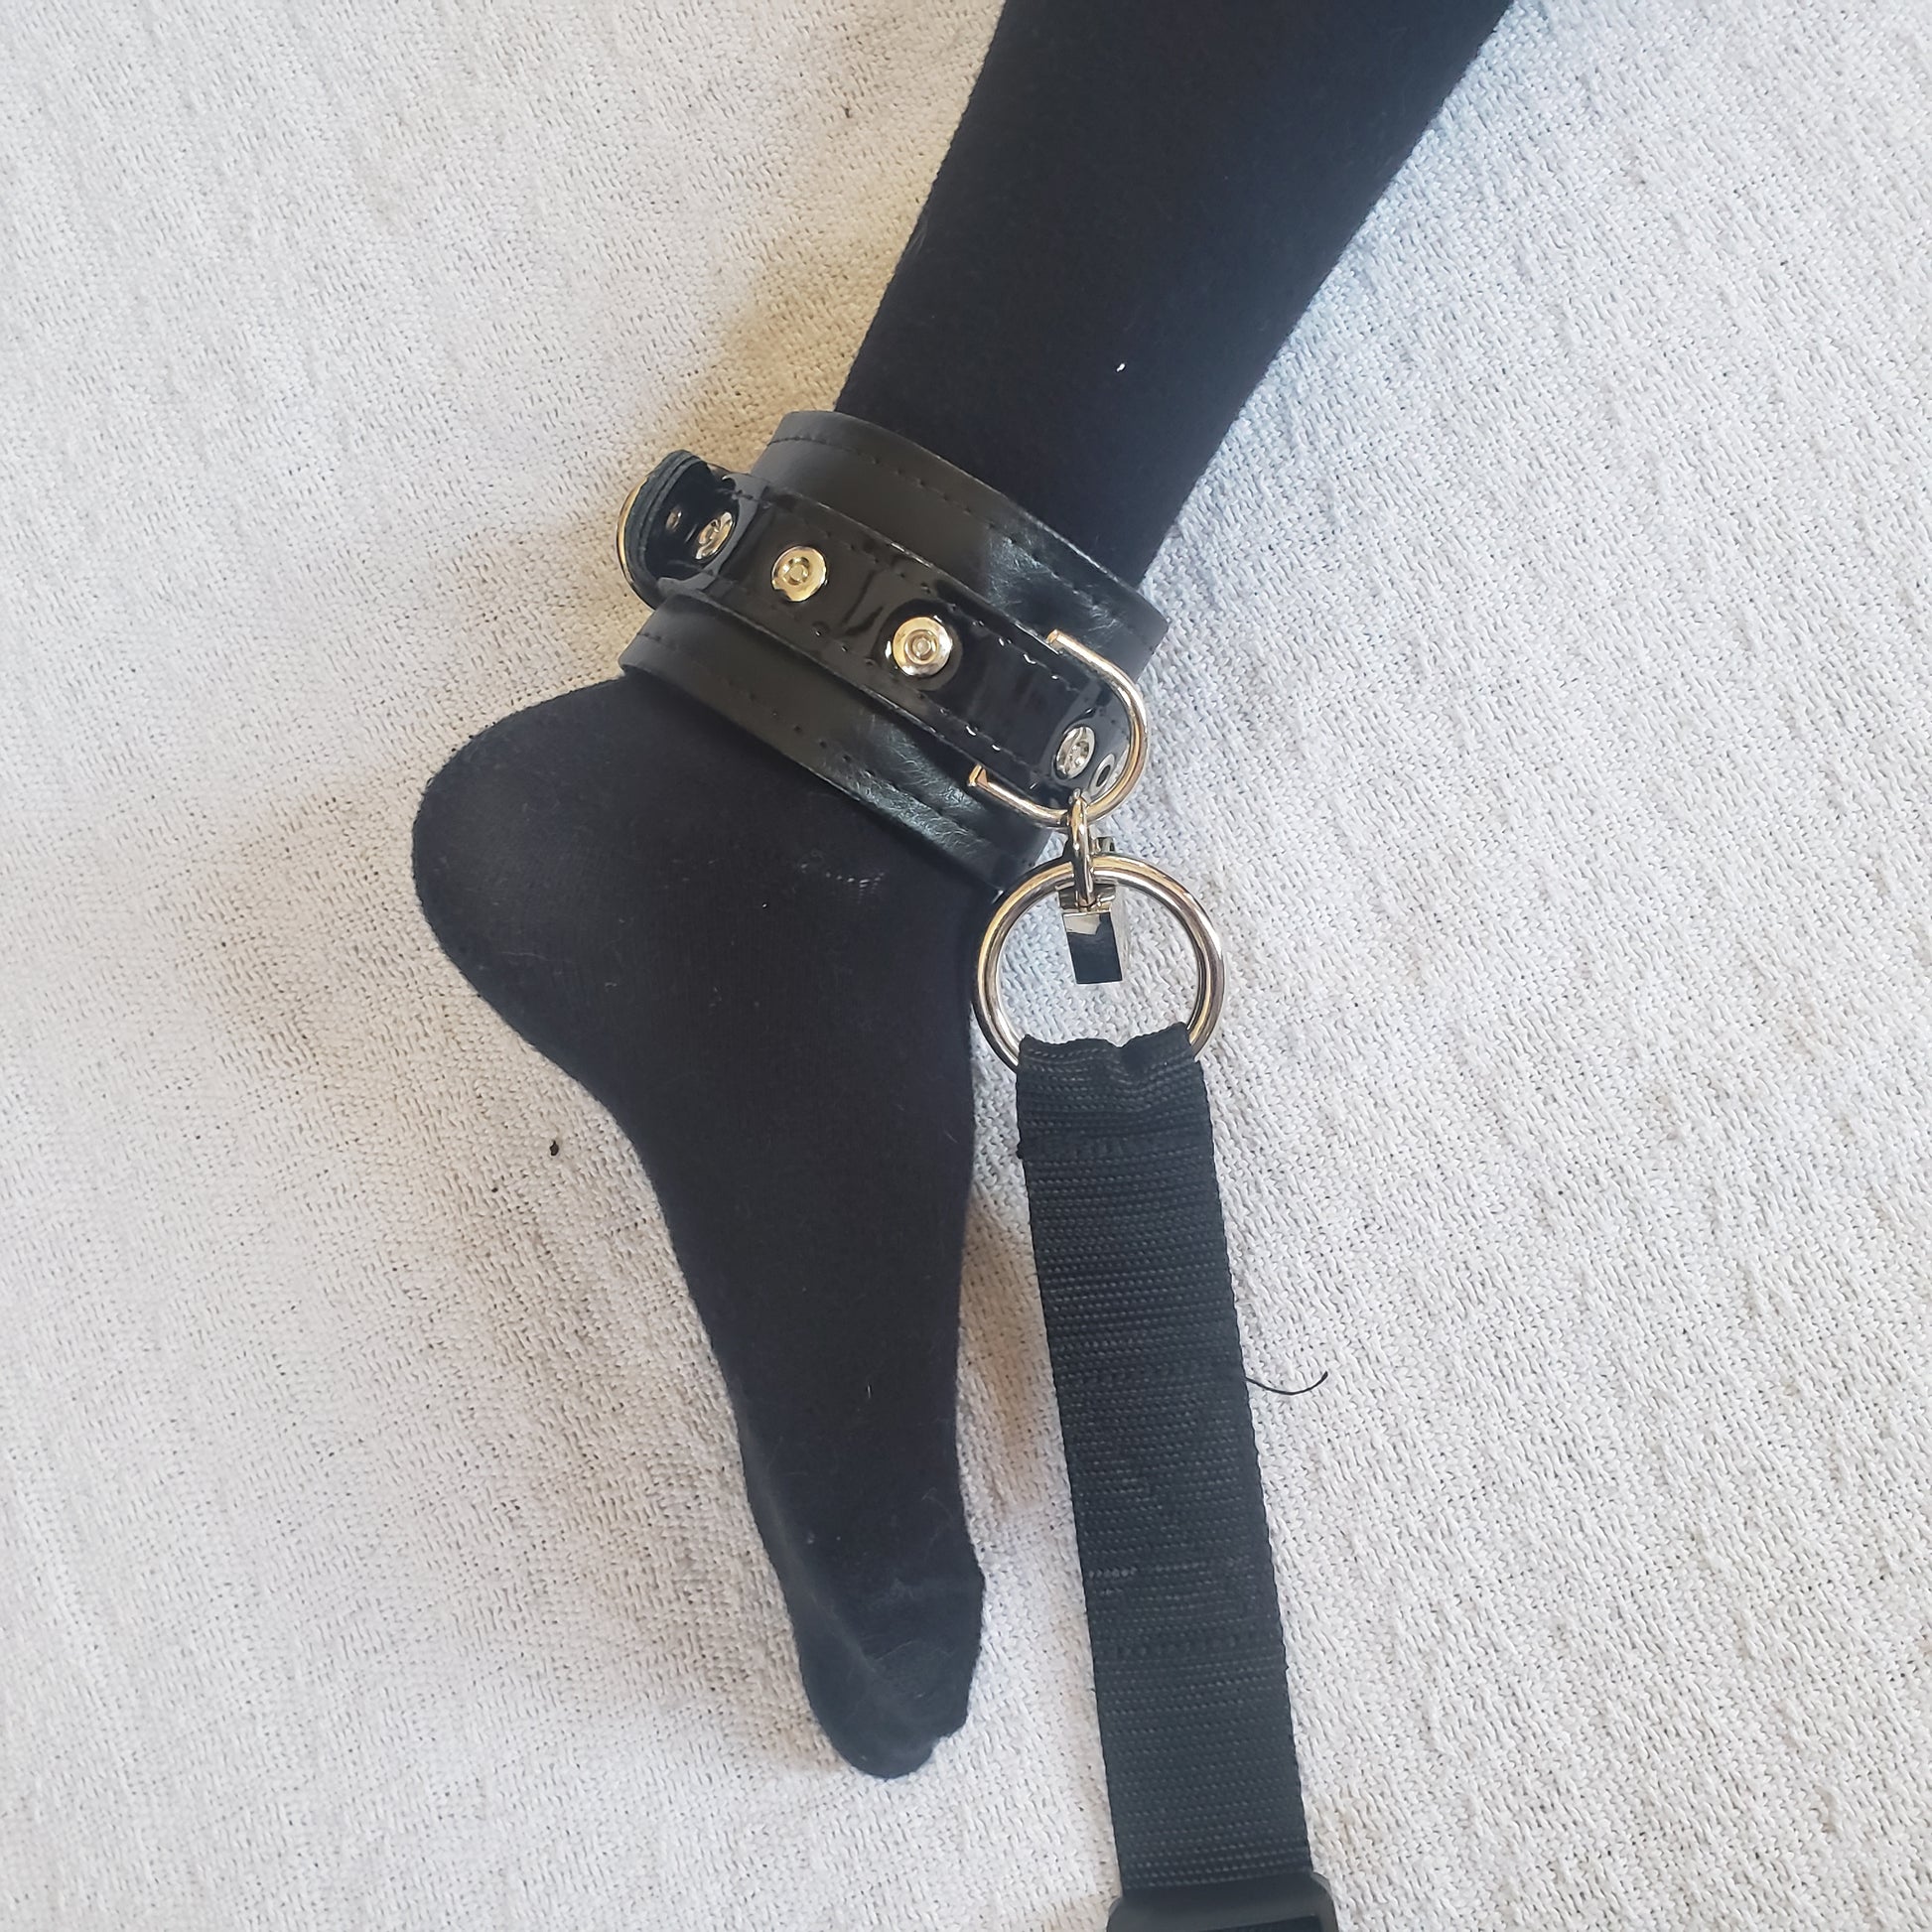 Ankle cuff with strap attached on model's foot.